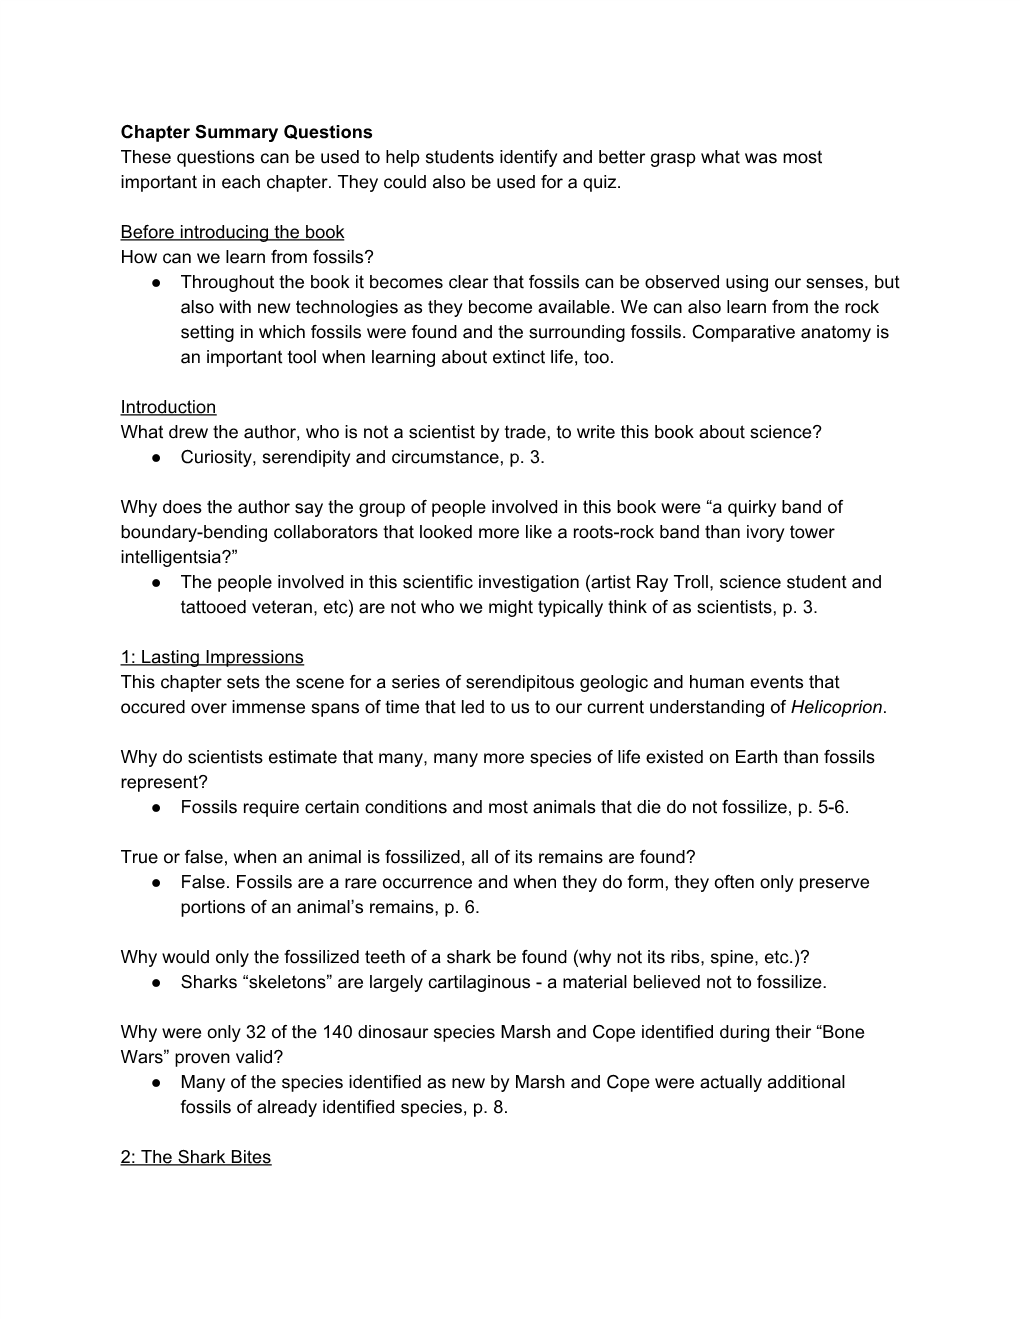 Chapter Summary Questions These Questions Can Be Used to Help Students Identify and Better Grasp What Was Most Important in Each Chapter